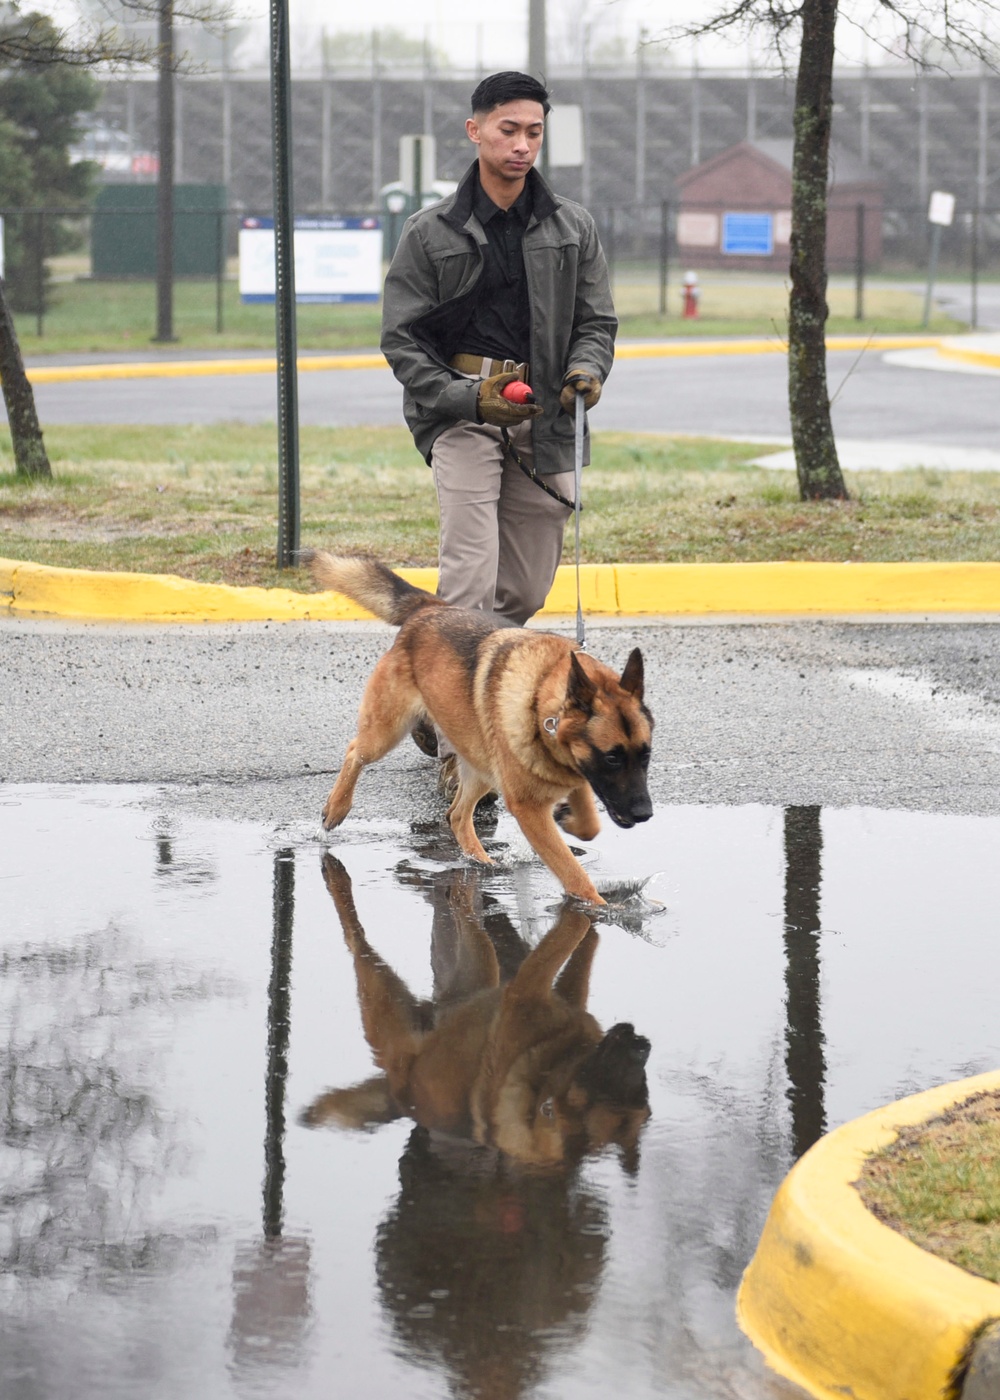 MWD team attends training, furthers capabilities